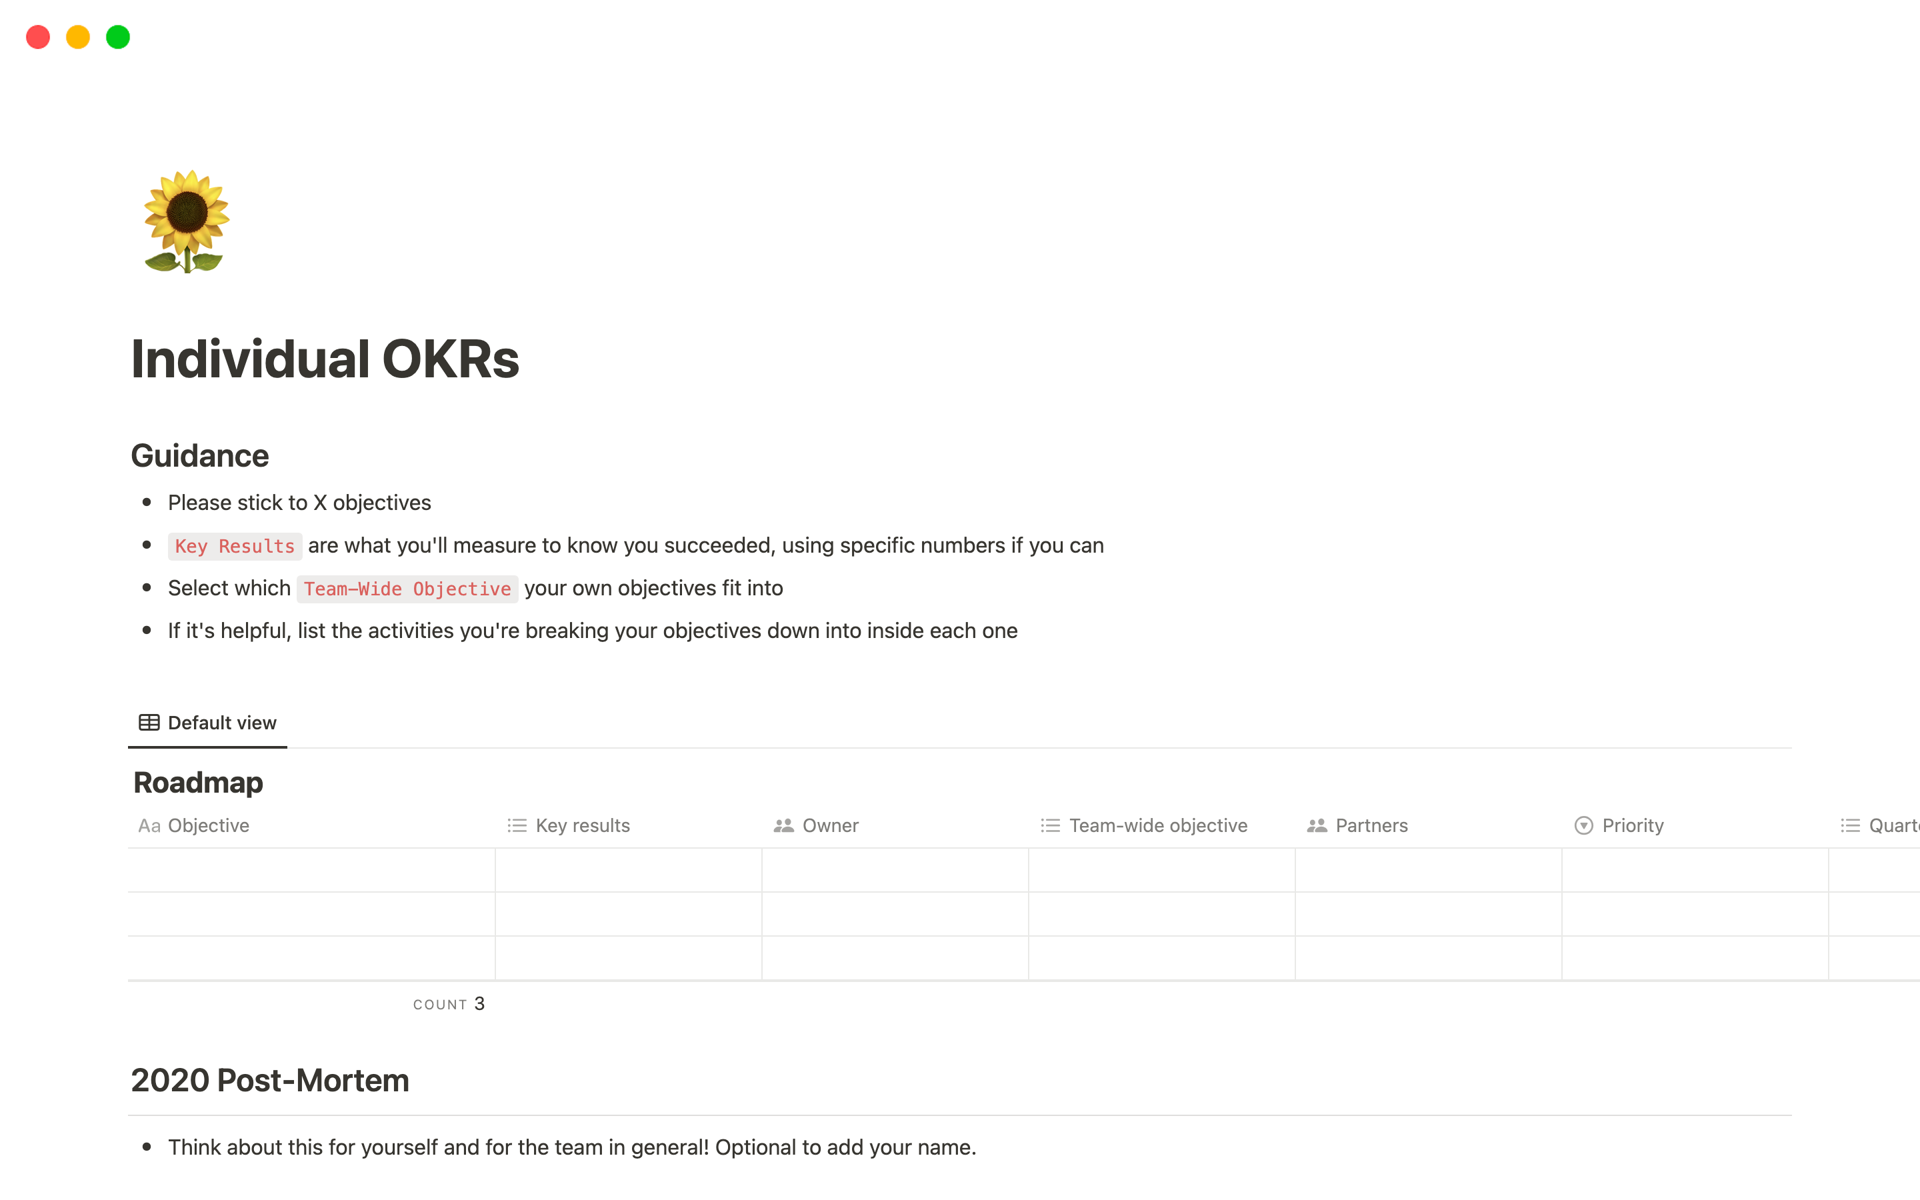 The desktop image for the Individual OKRs template